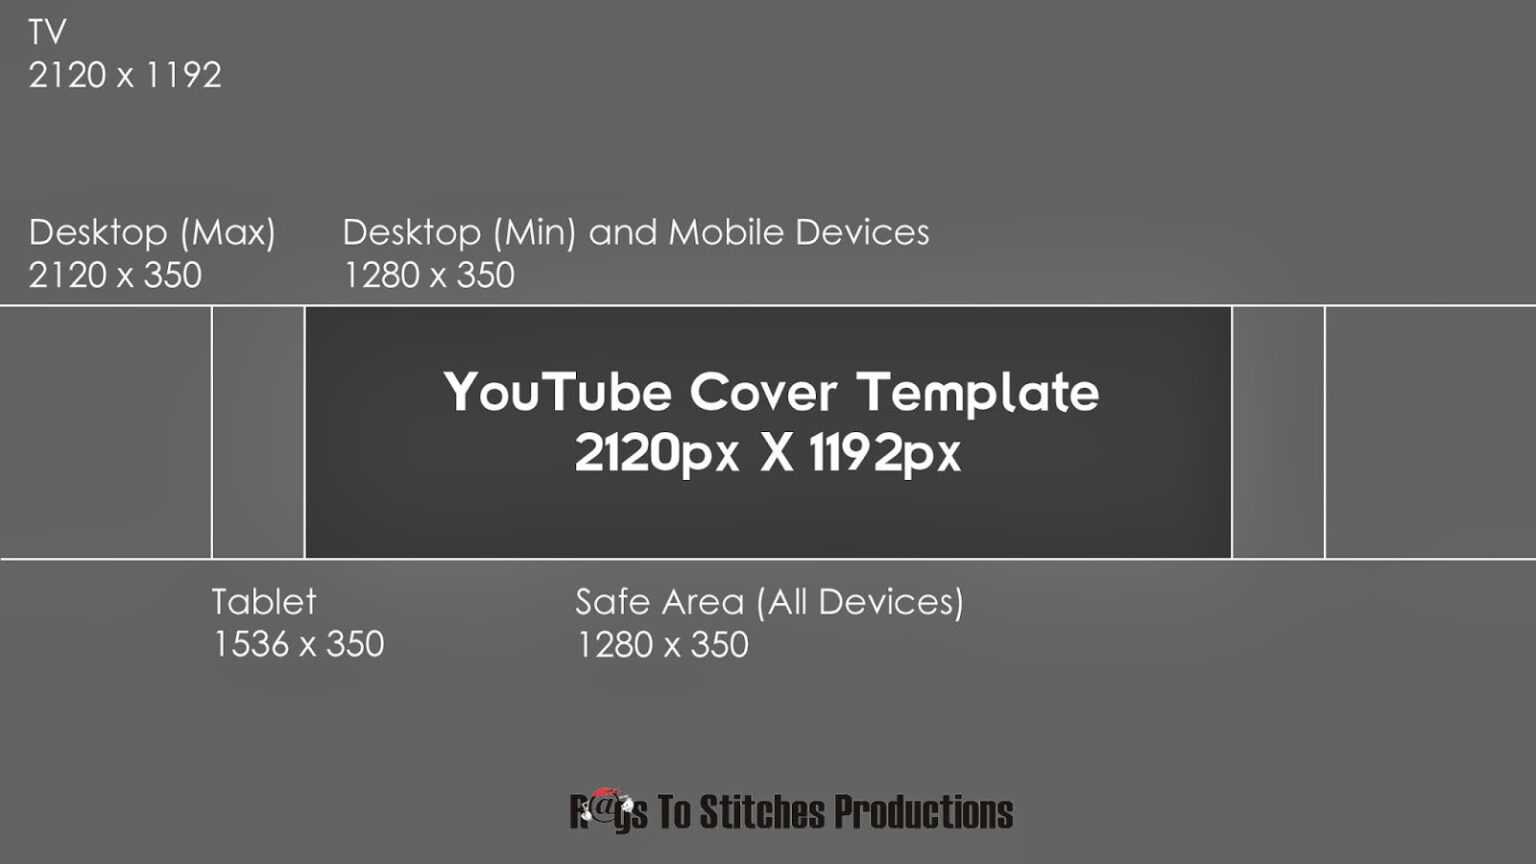 youtube banner size